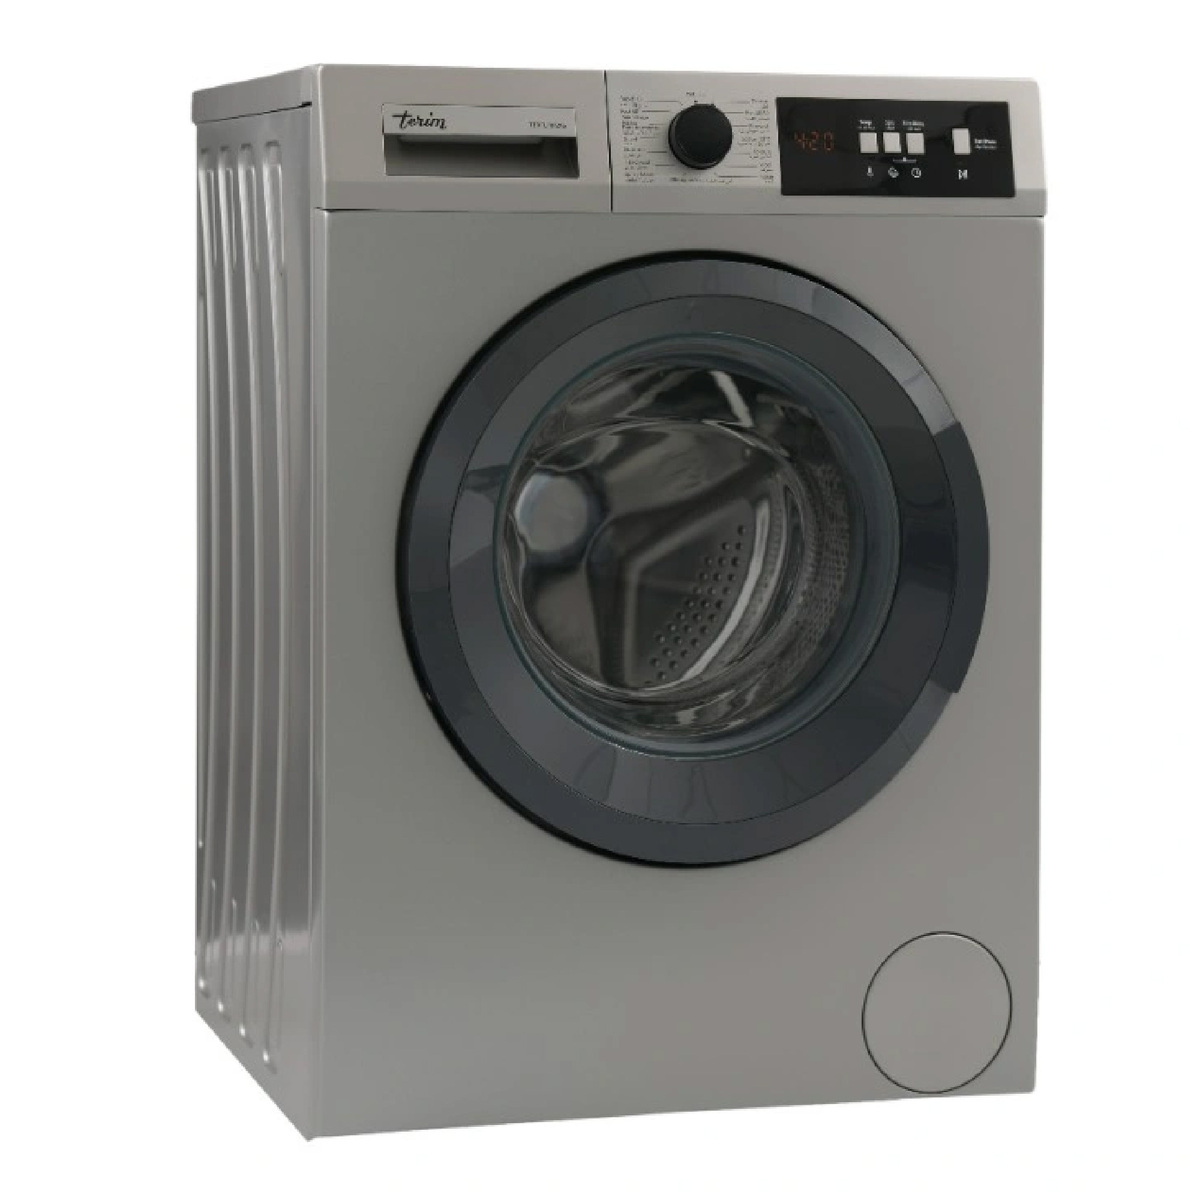 Terim Front Load Fully Automatic Washing Machine, 10 Kg, 1400 RPM, Silver, TERFL1012VS